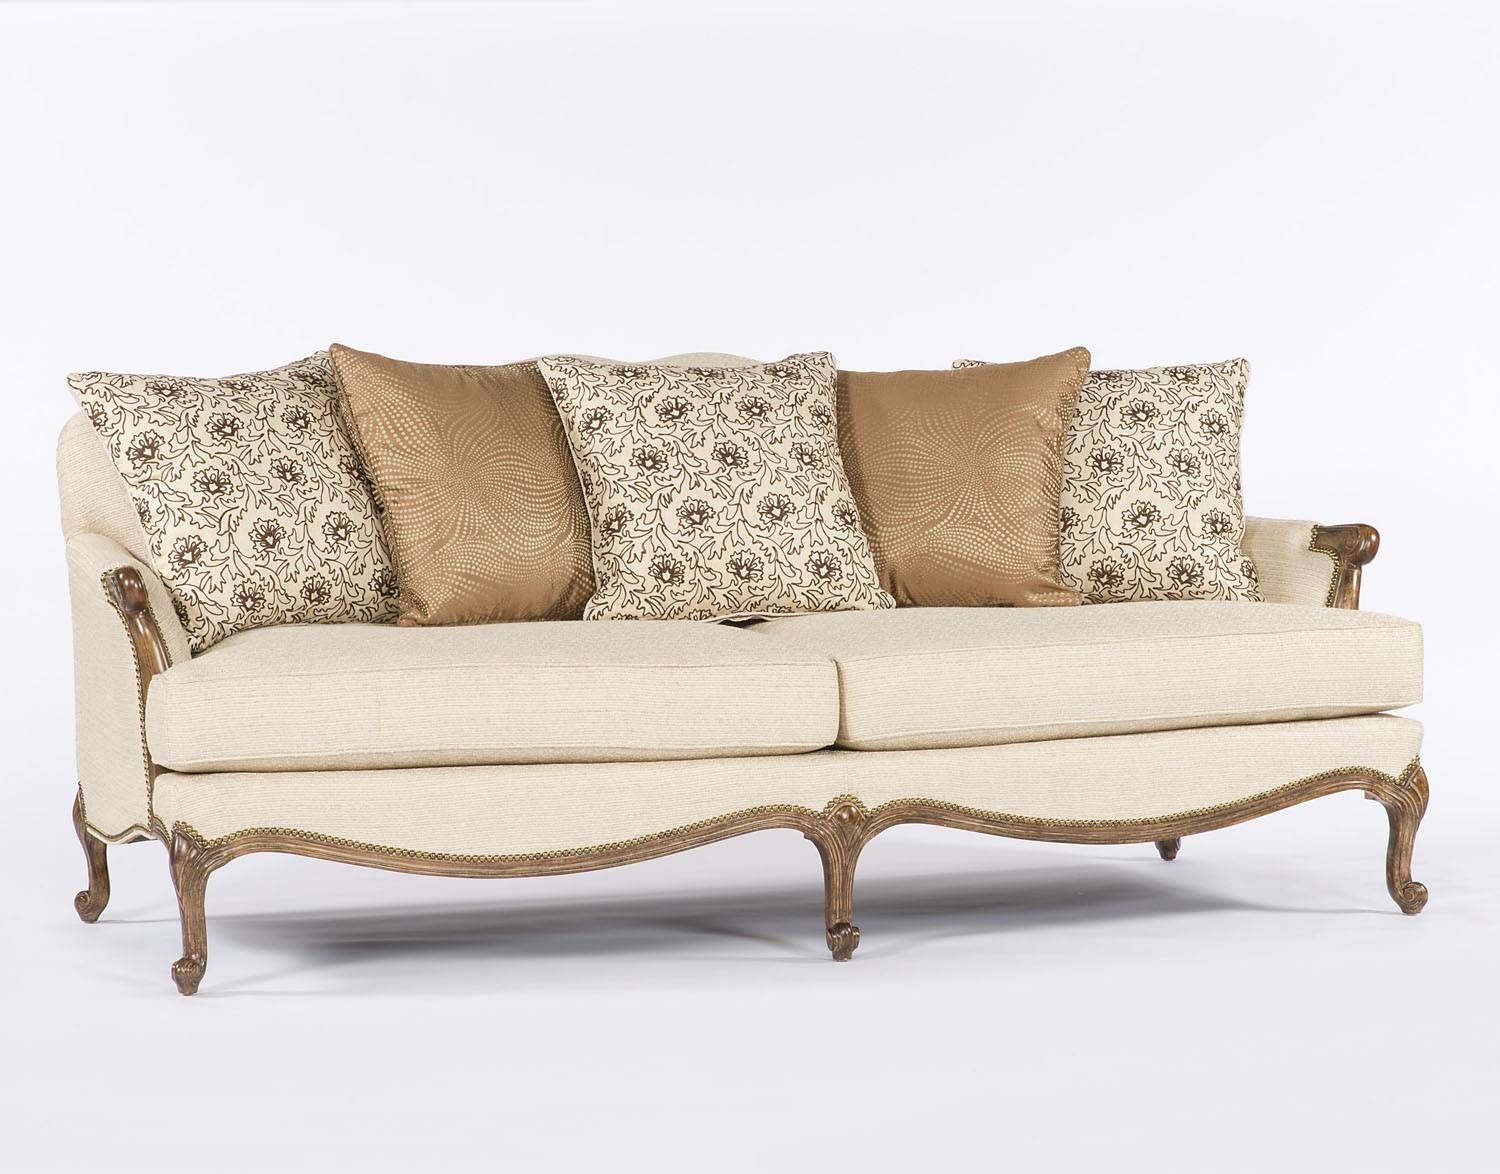 Colonial Style Sofas 29 With Colonial Style Sofas | Jinanhongyu With Colonial Sofas (View 1 of 15)